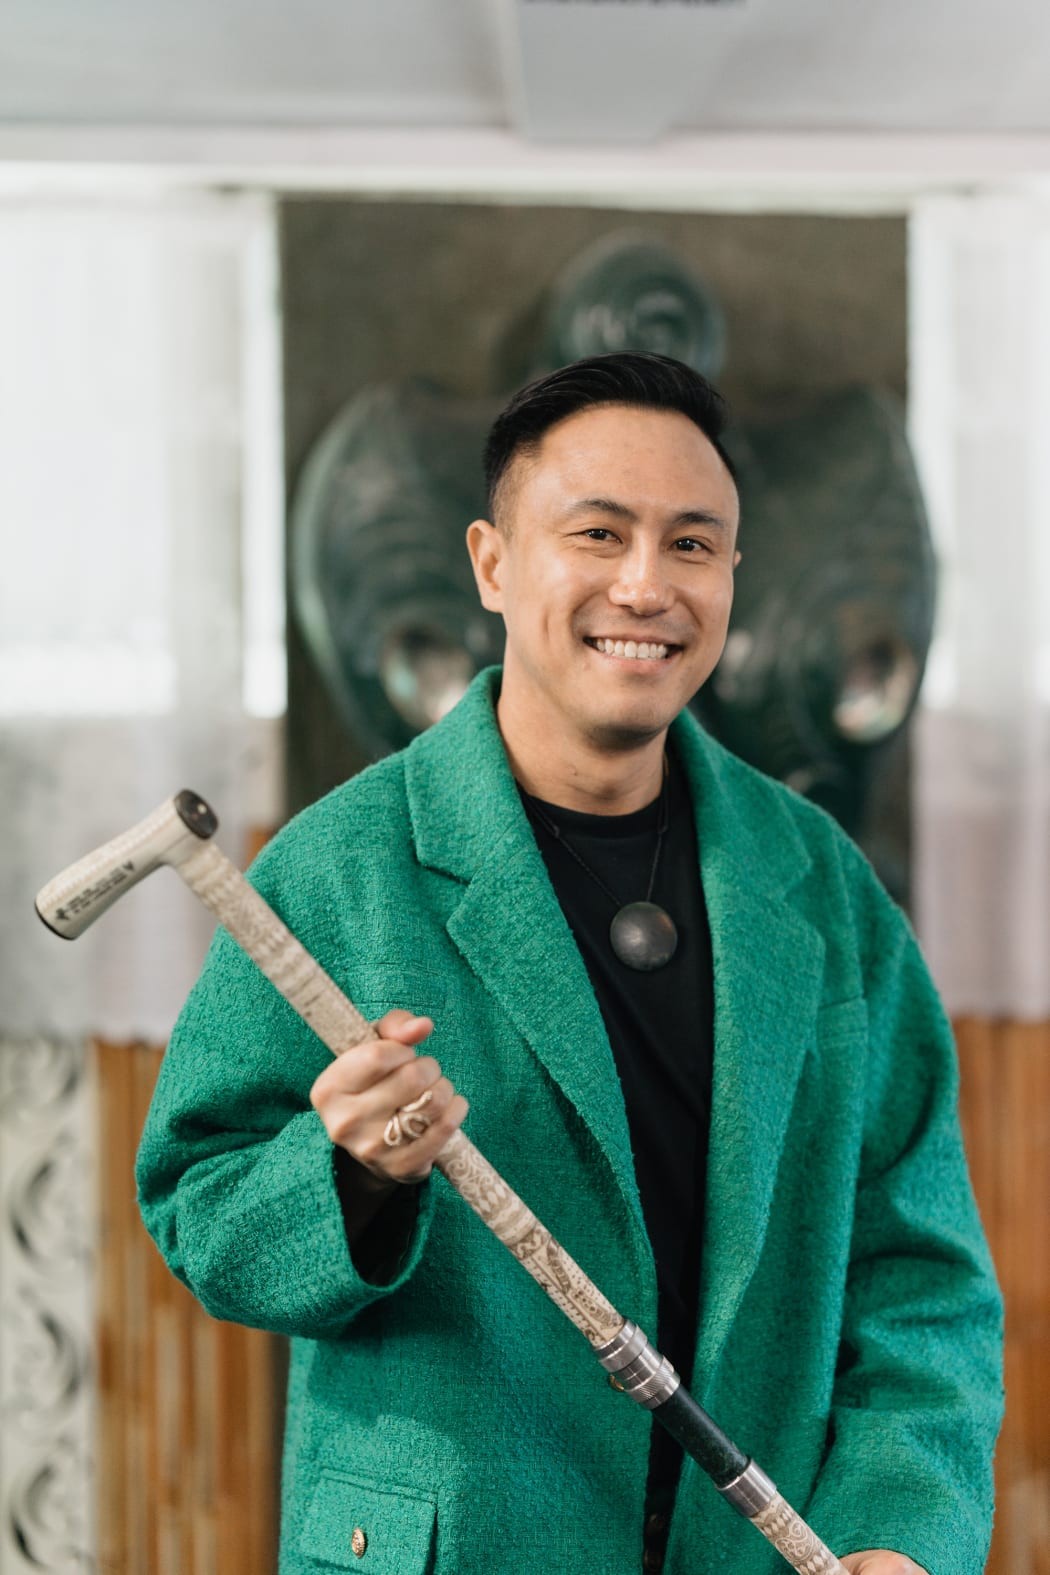 Chris Tse with short black hair and dimples, smiles at the camera. He is wearing a green coat and pounamu and holding a carved tokotoko.